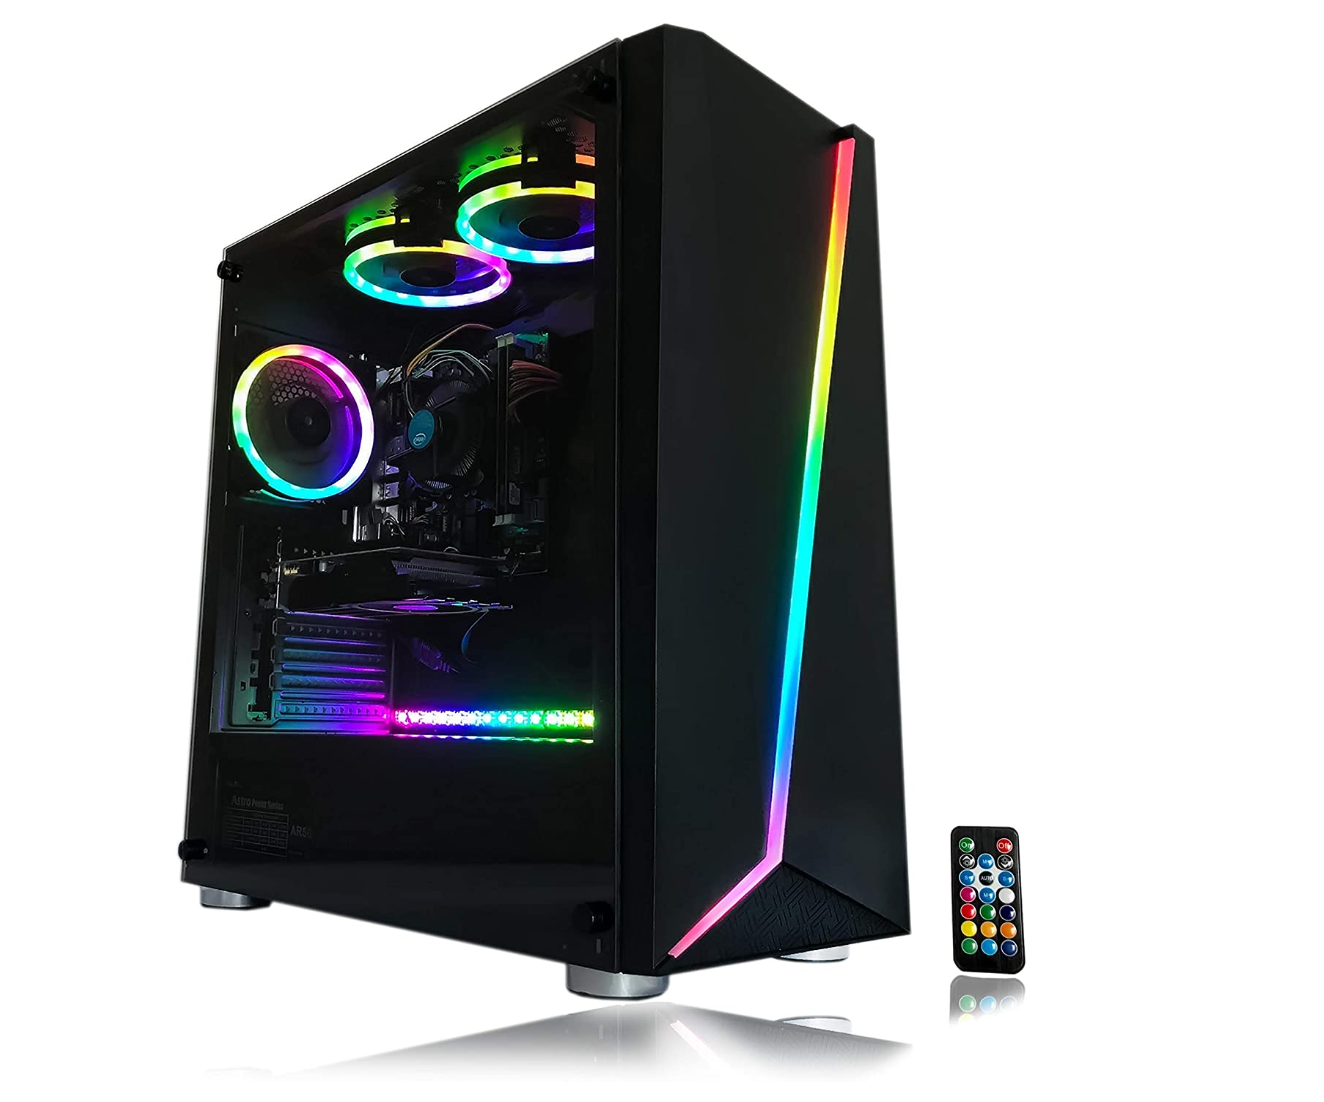 A black PC featuring RGB lighting and a clear panel on the side.